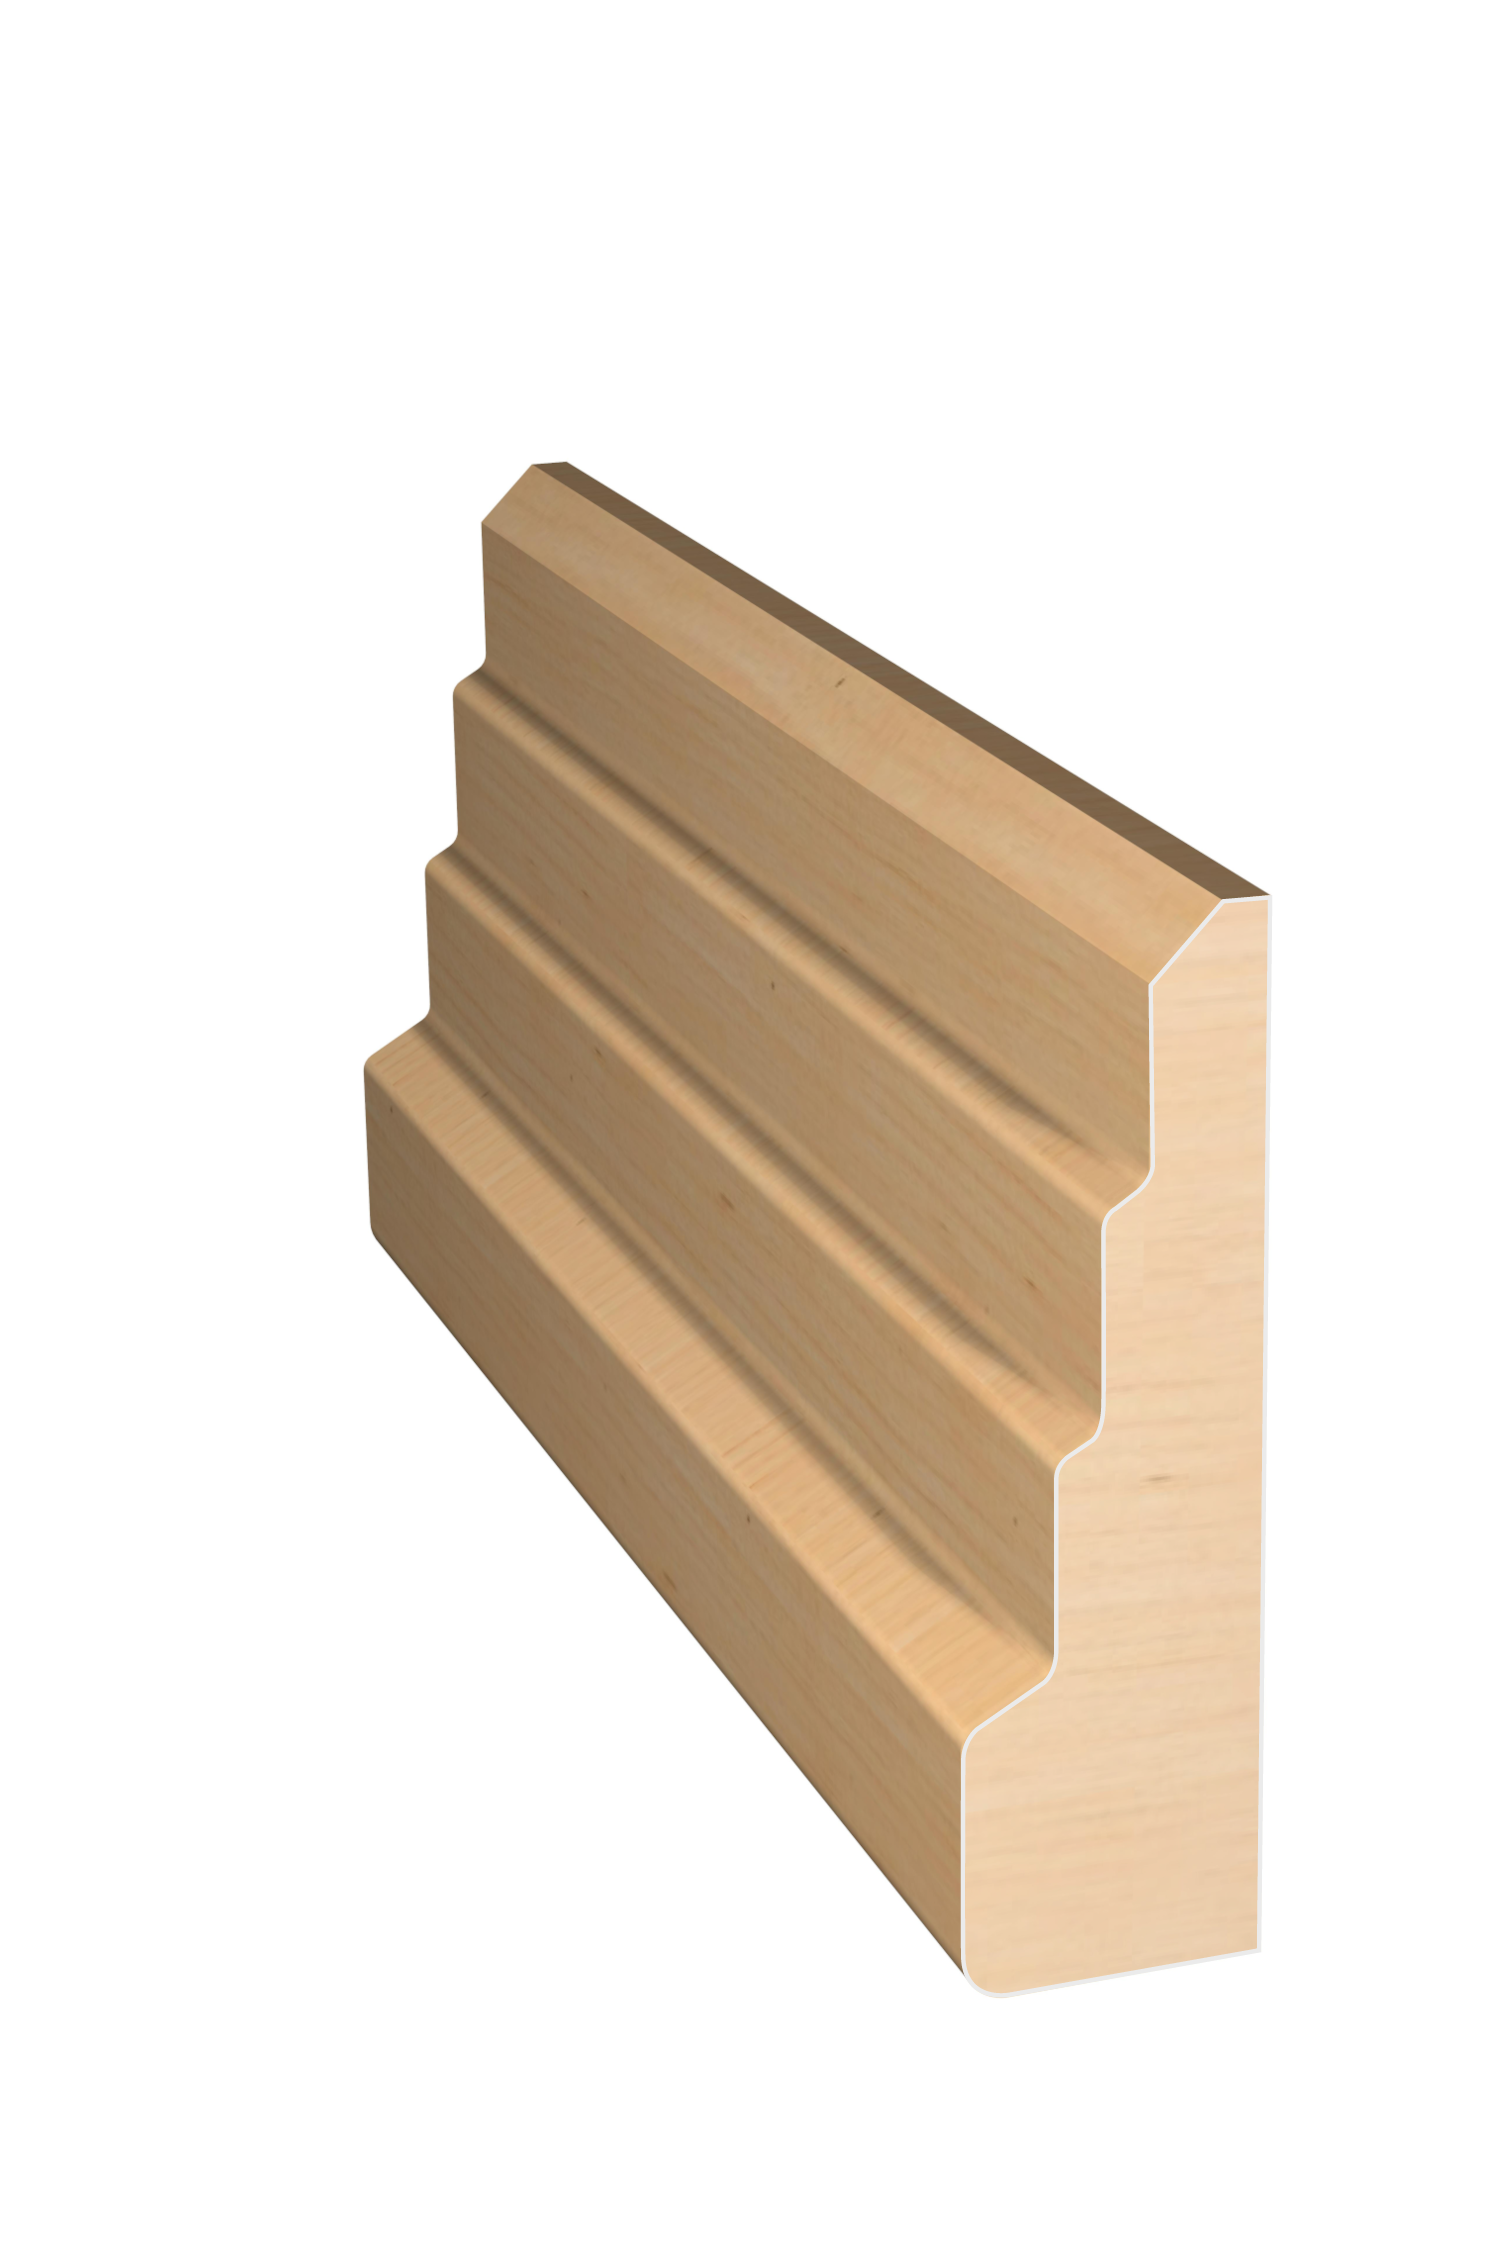 Three dimensional rendering of custom casing wood molding CAPL2781 made by Public Lumber Company in Detroit.